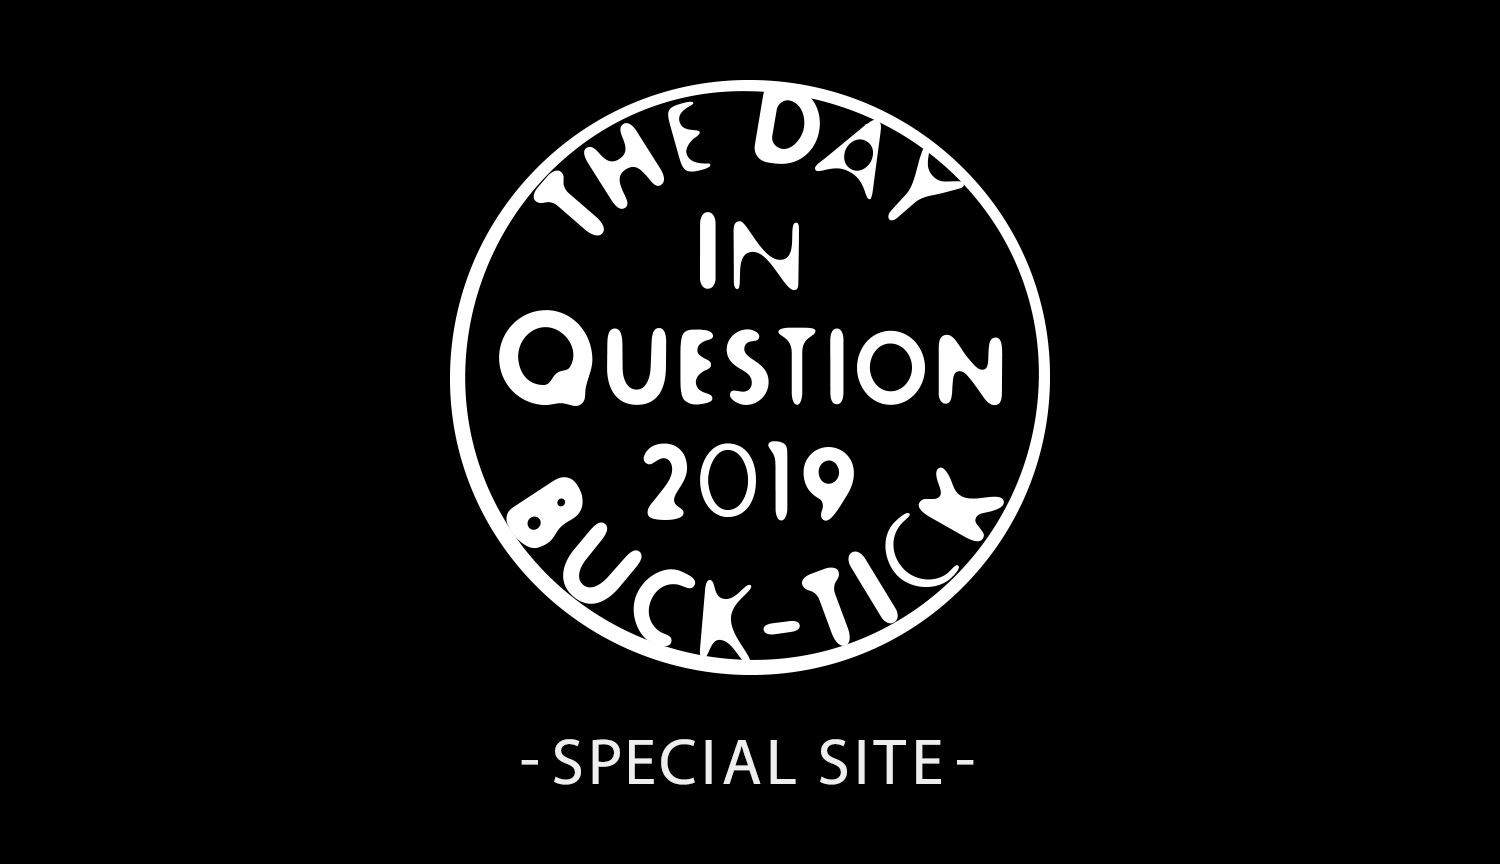 THE DAY IN QUESTION 2019